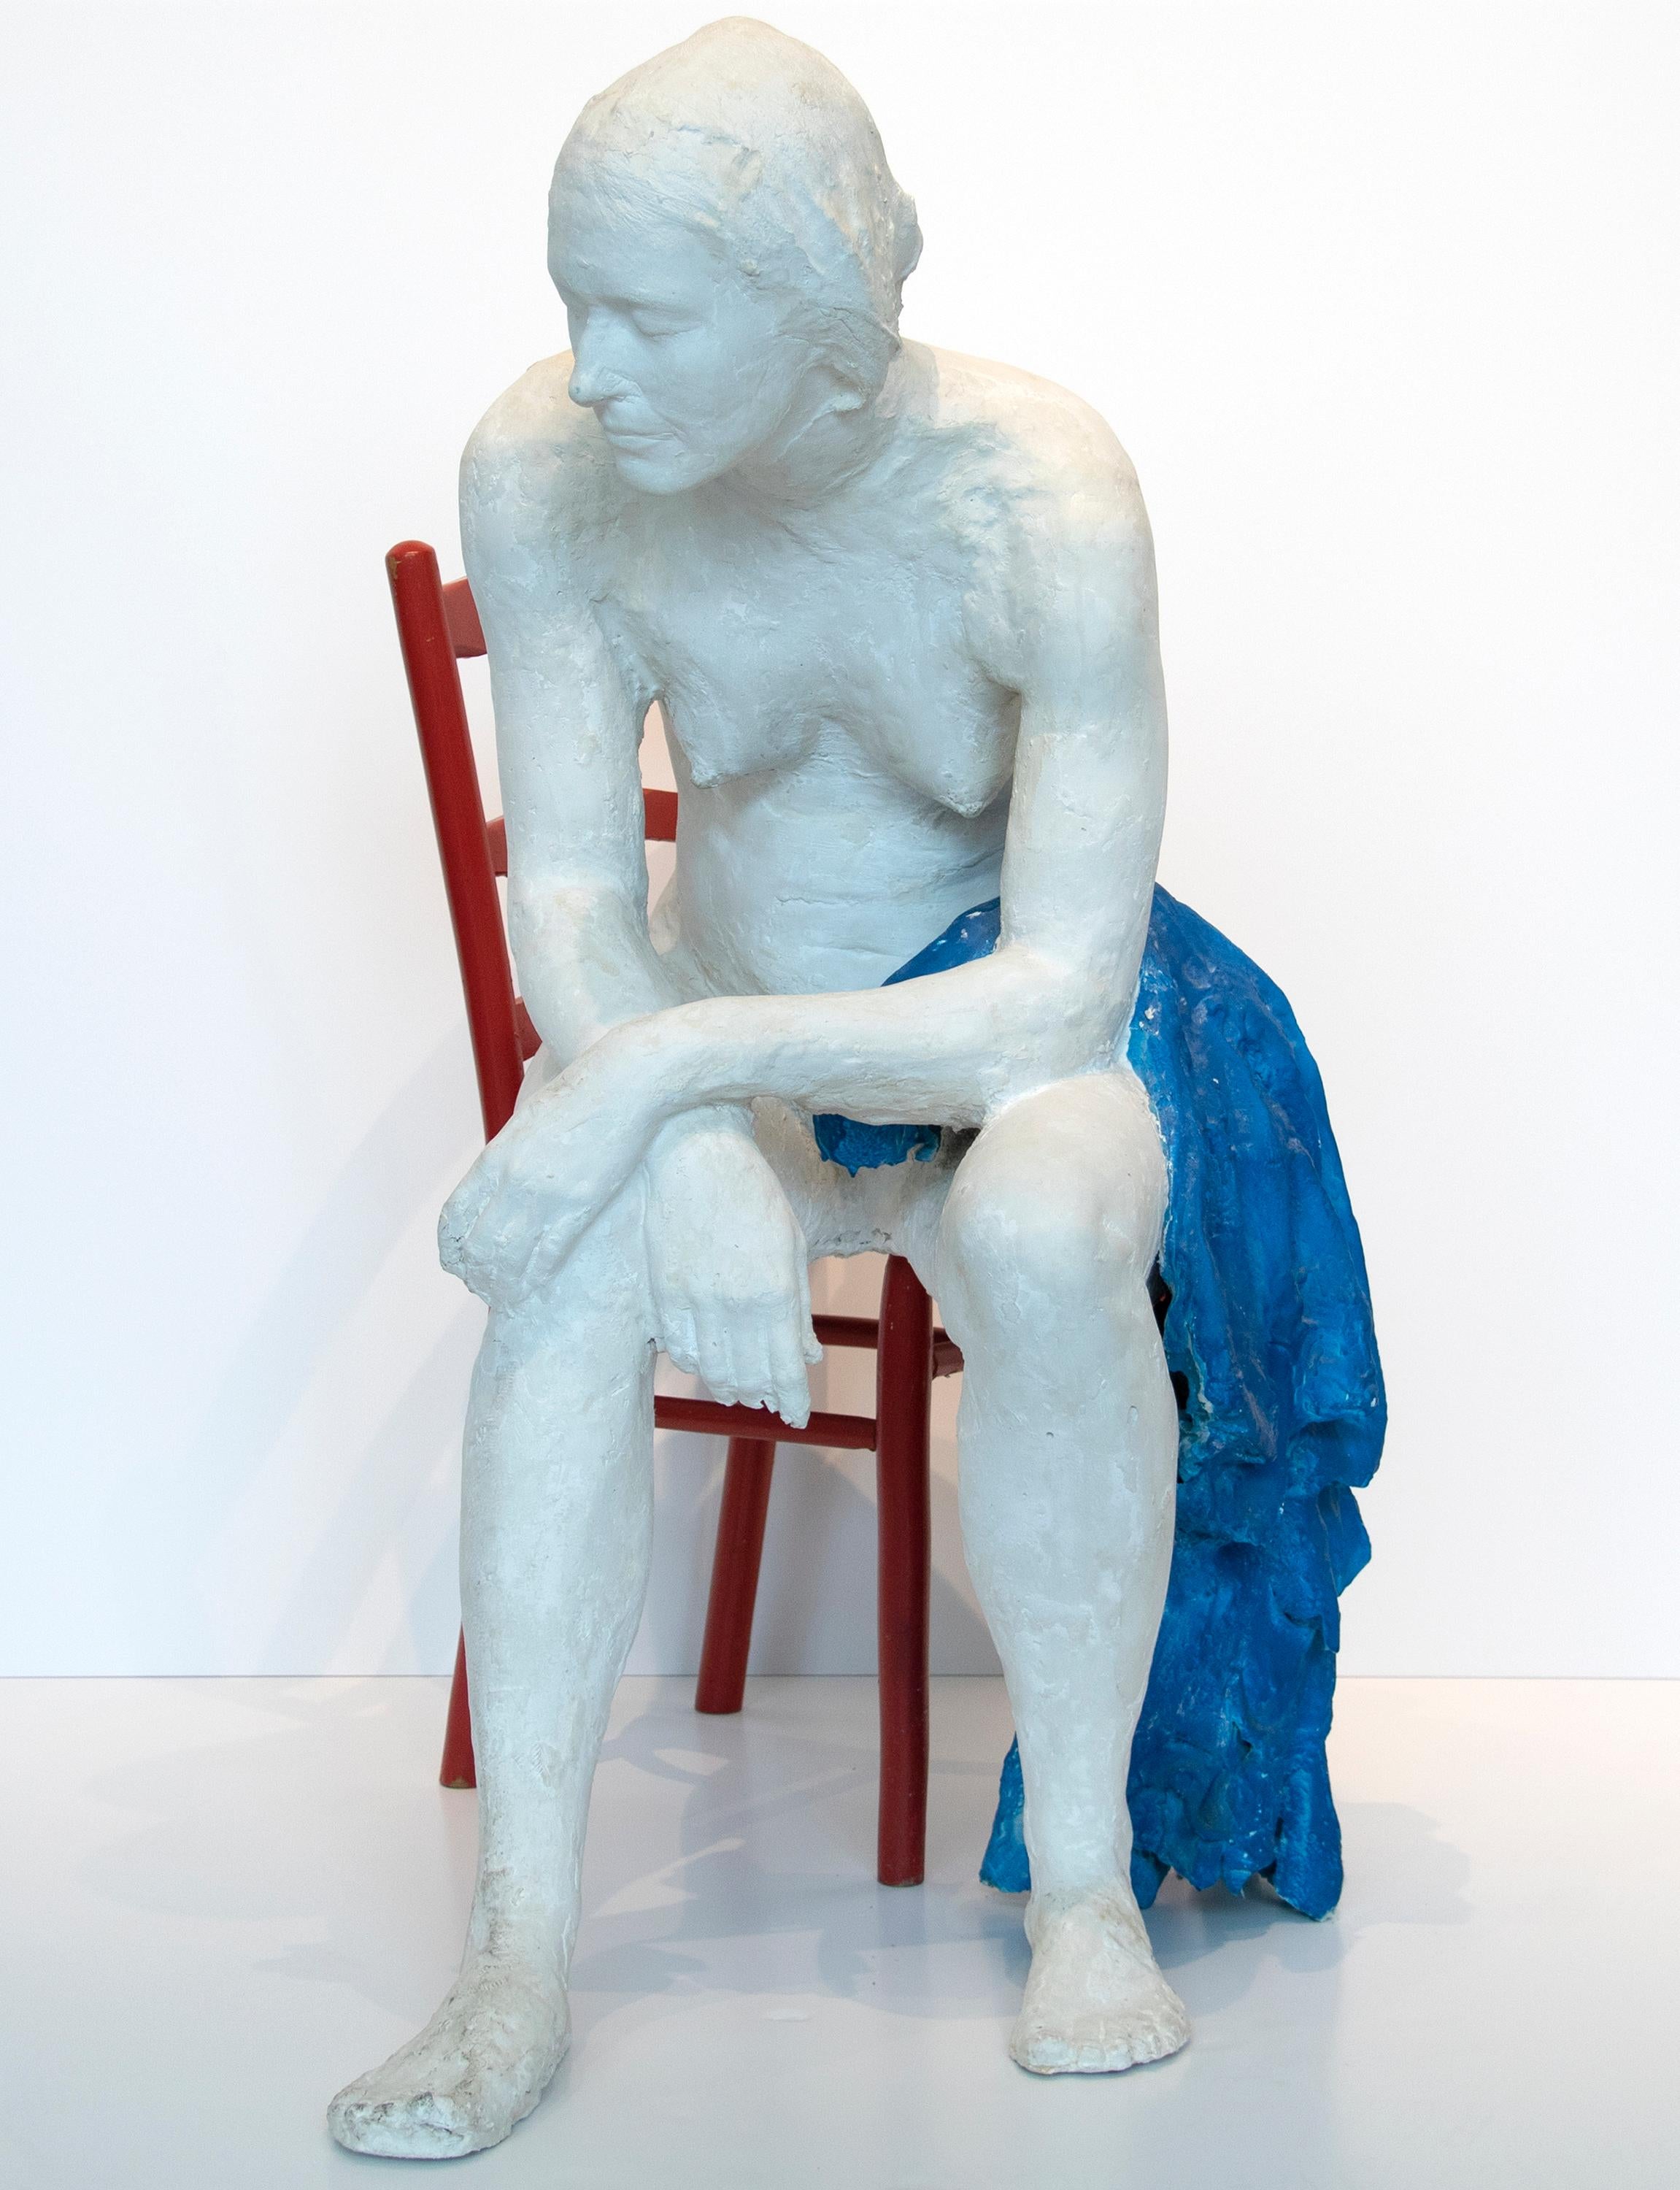 Girl on Red Chair - Pop Art Sculpture by George Segal